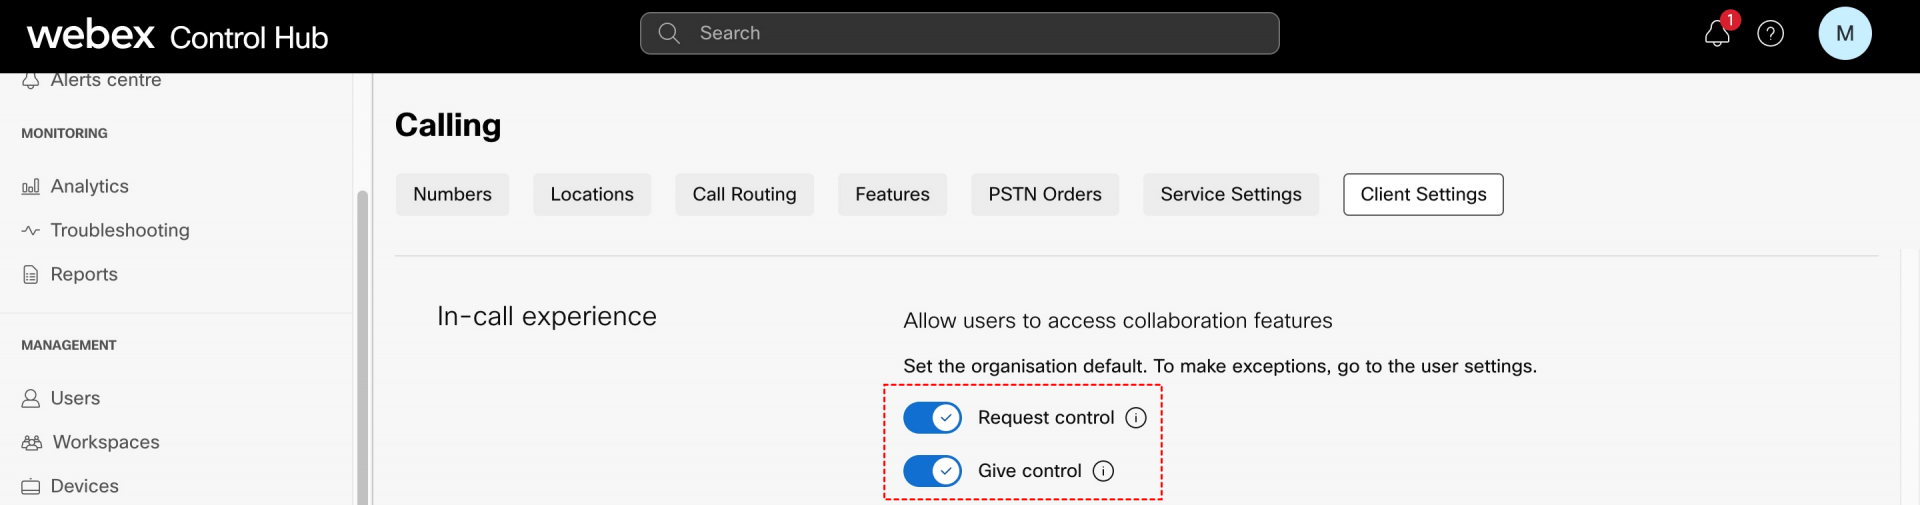 /screenshot/others/webex/activate-request-control-and-give-control.png